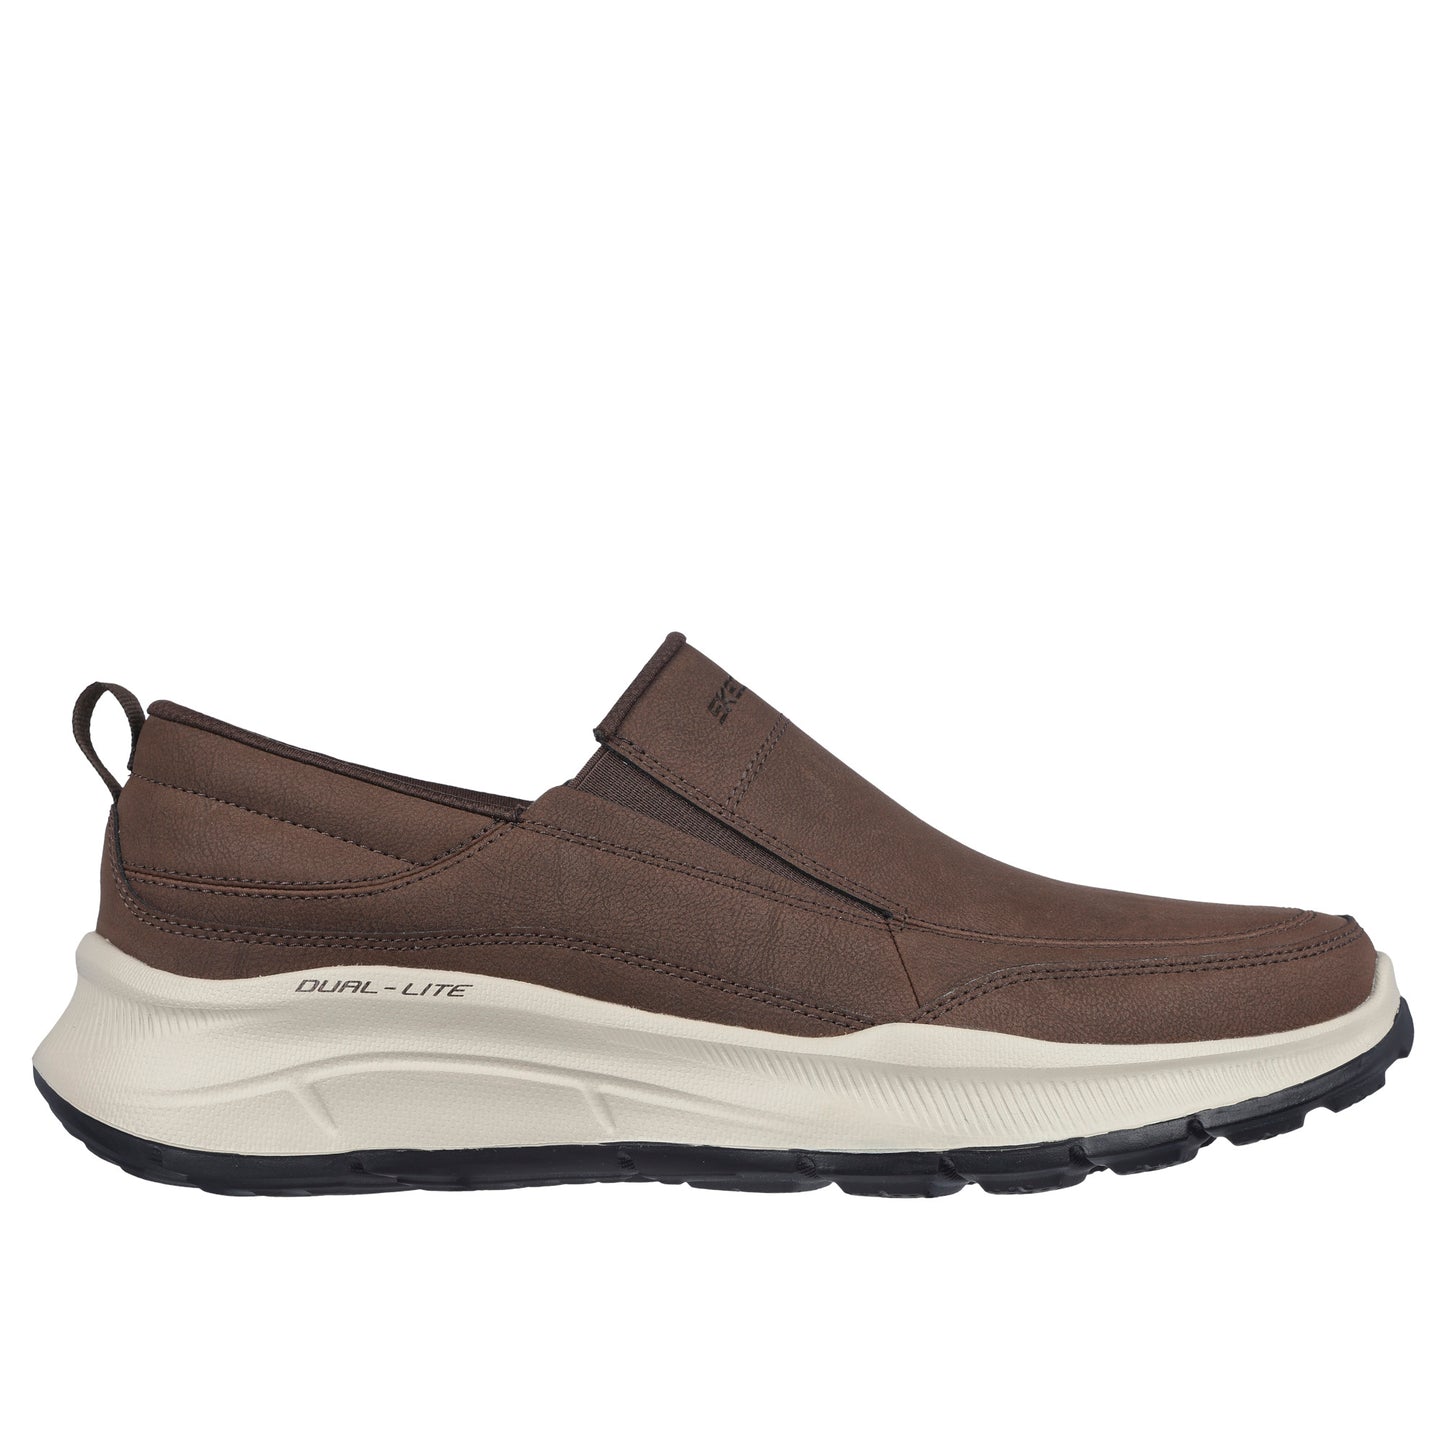 Skechers 232517 Equalizer 5.0 - Harvey Chocolate Brown Trainers